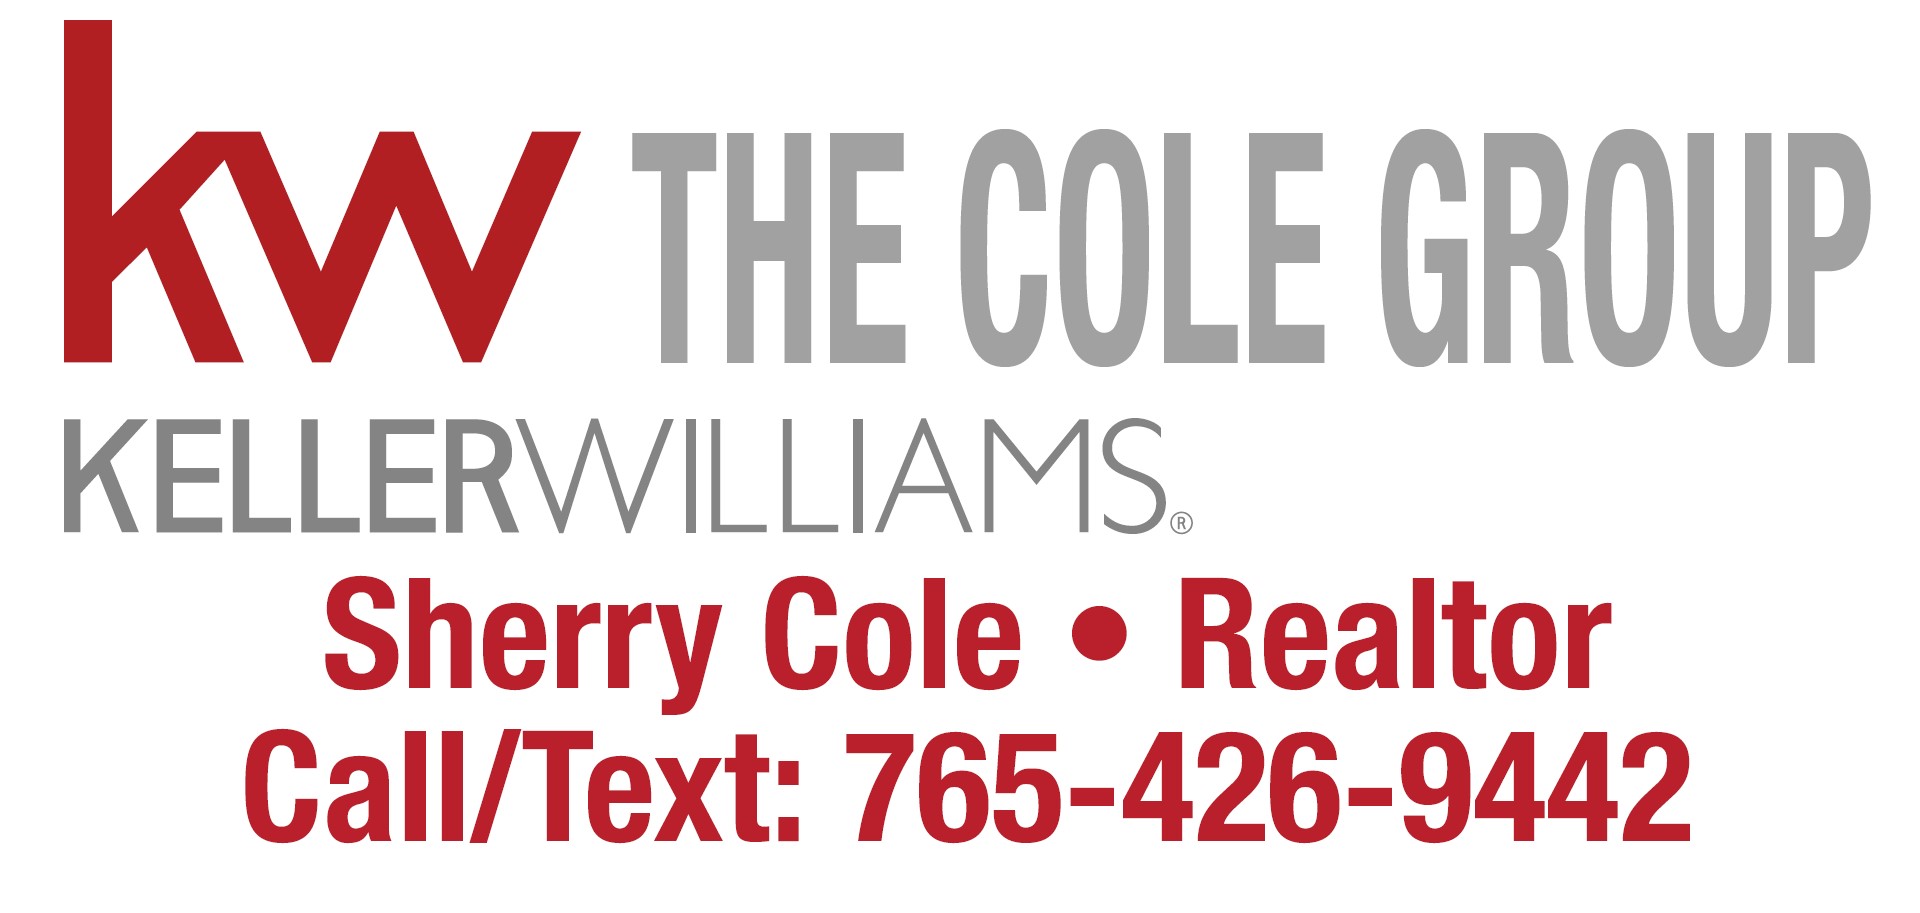 Keller Williams - The Cole Group